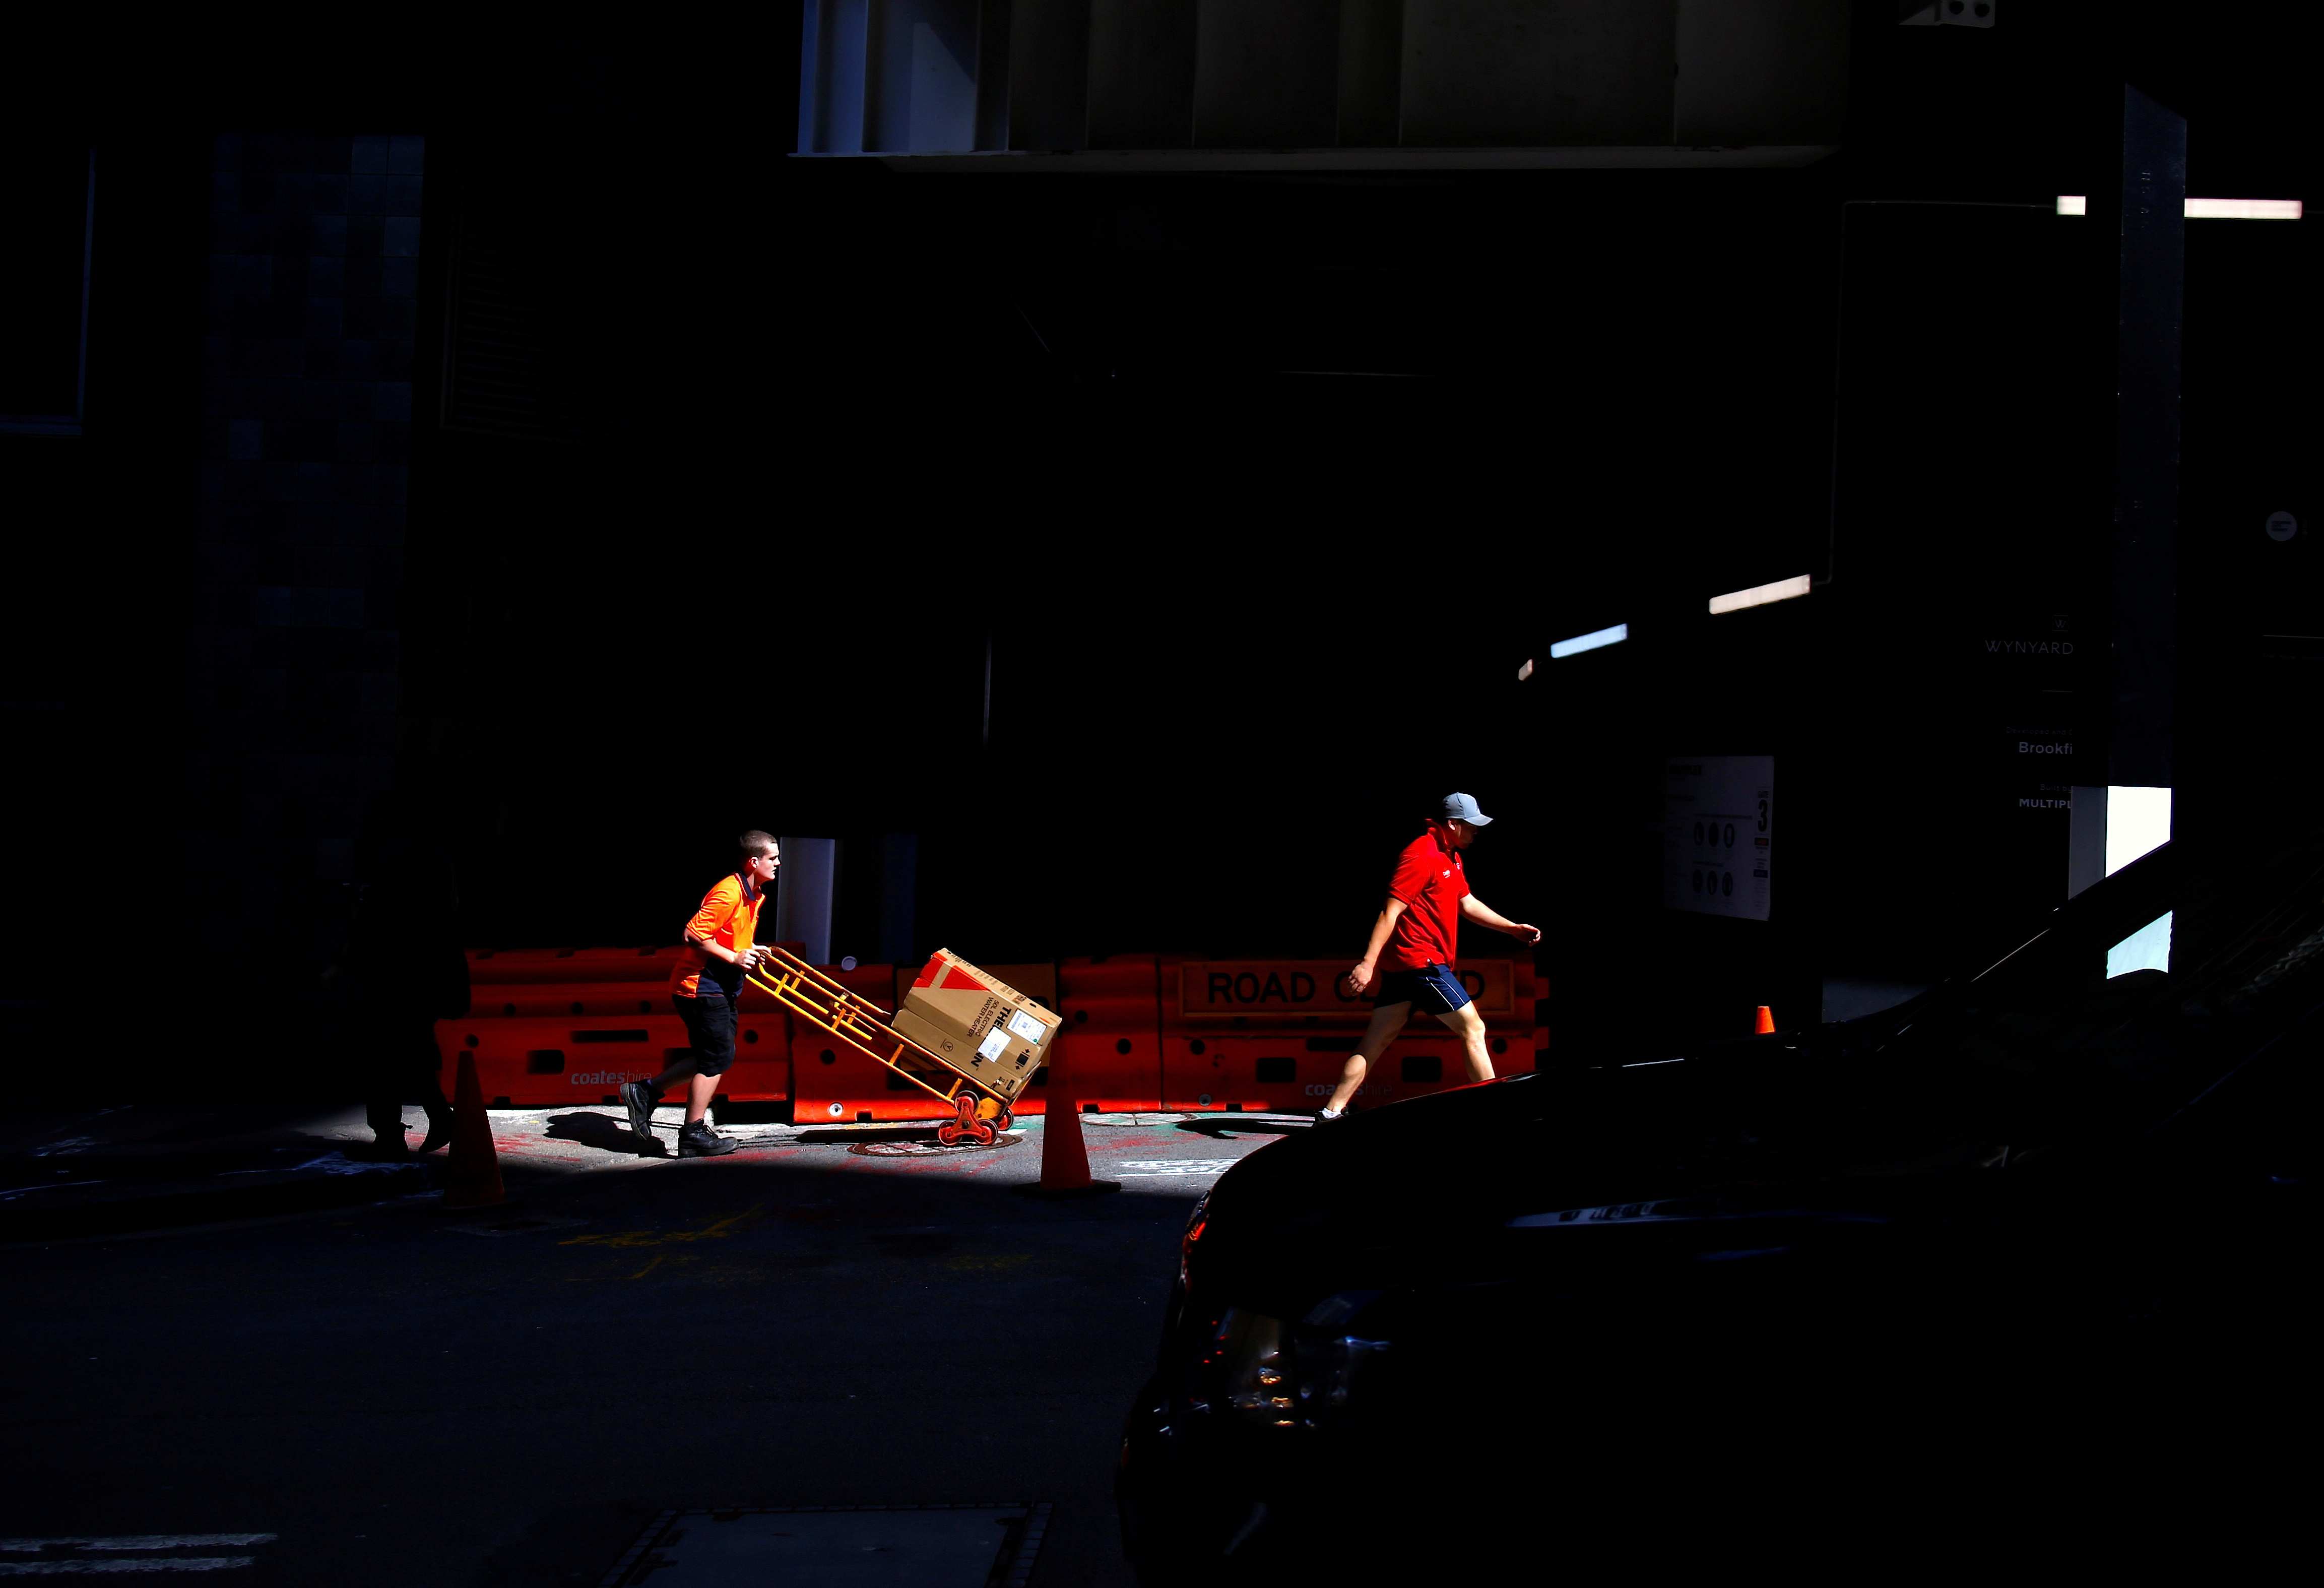 A worker pushes a trolley loaded with goods past a construction site in the central business district of Sydney